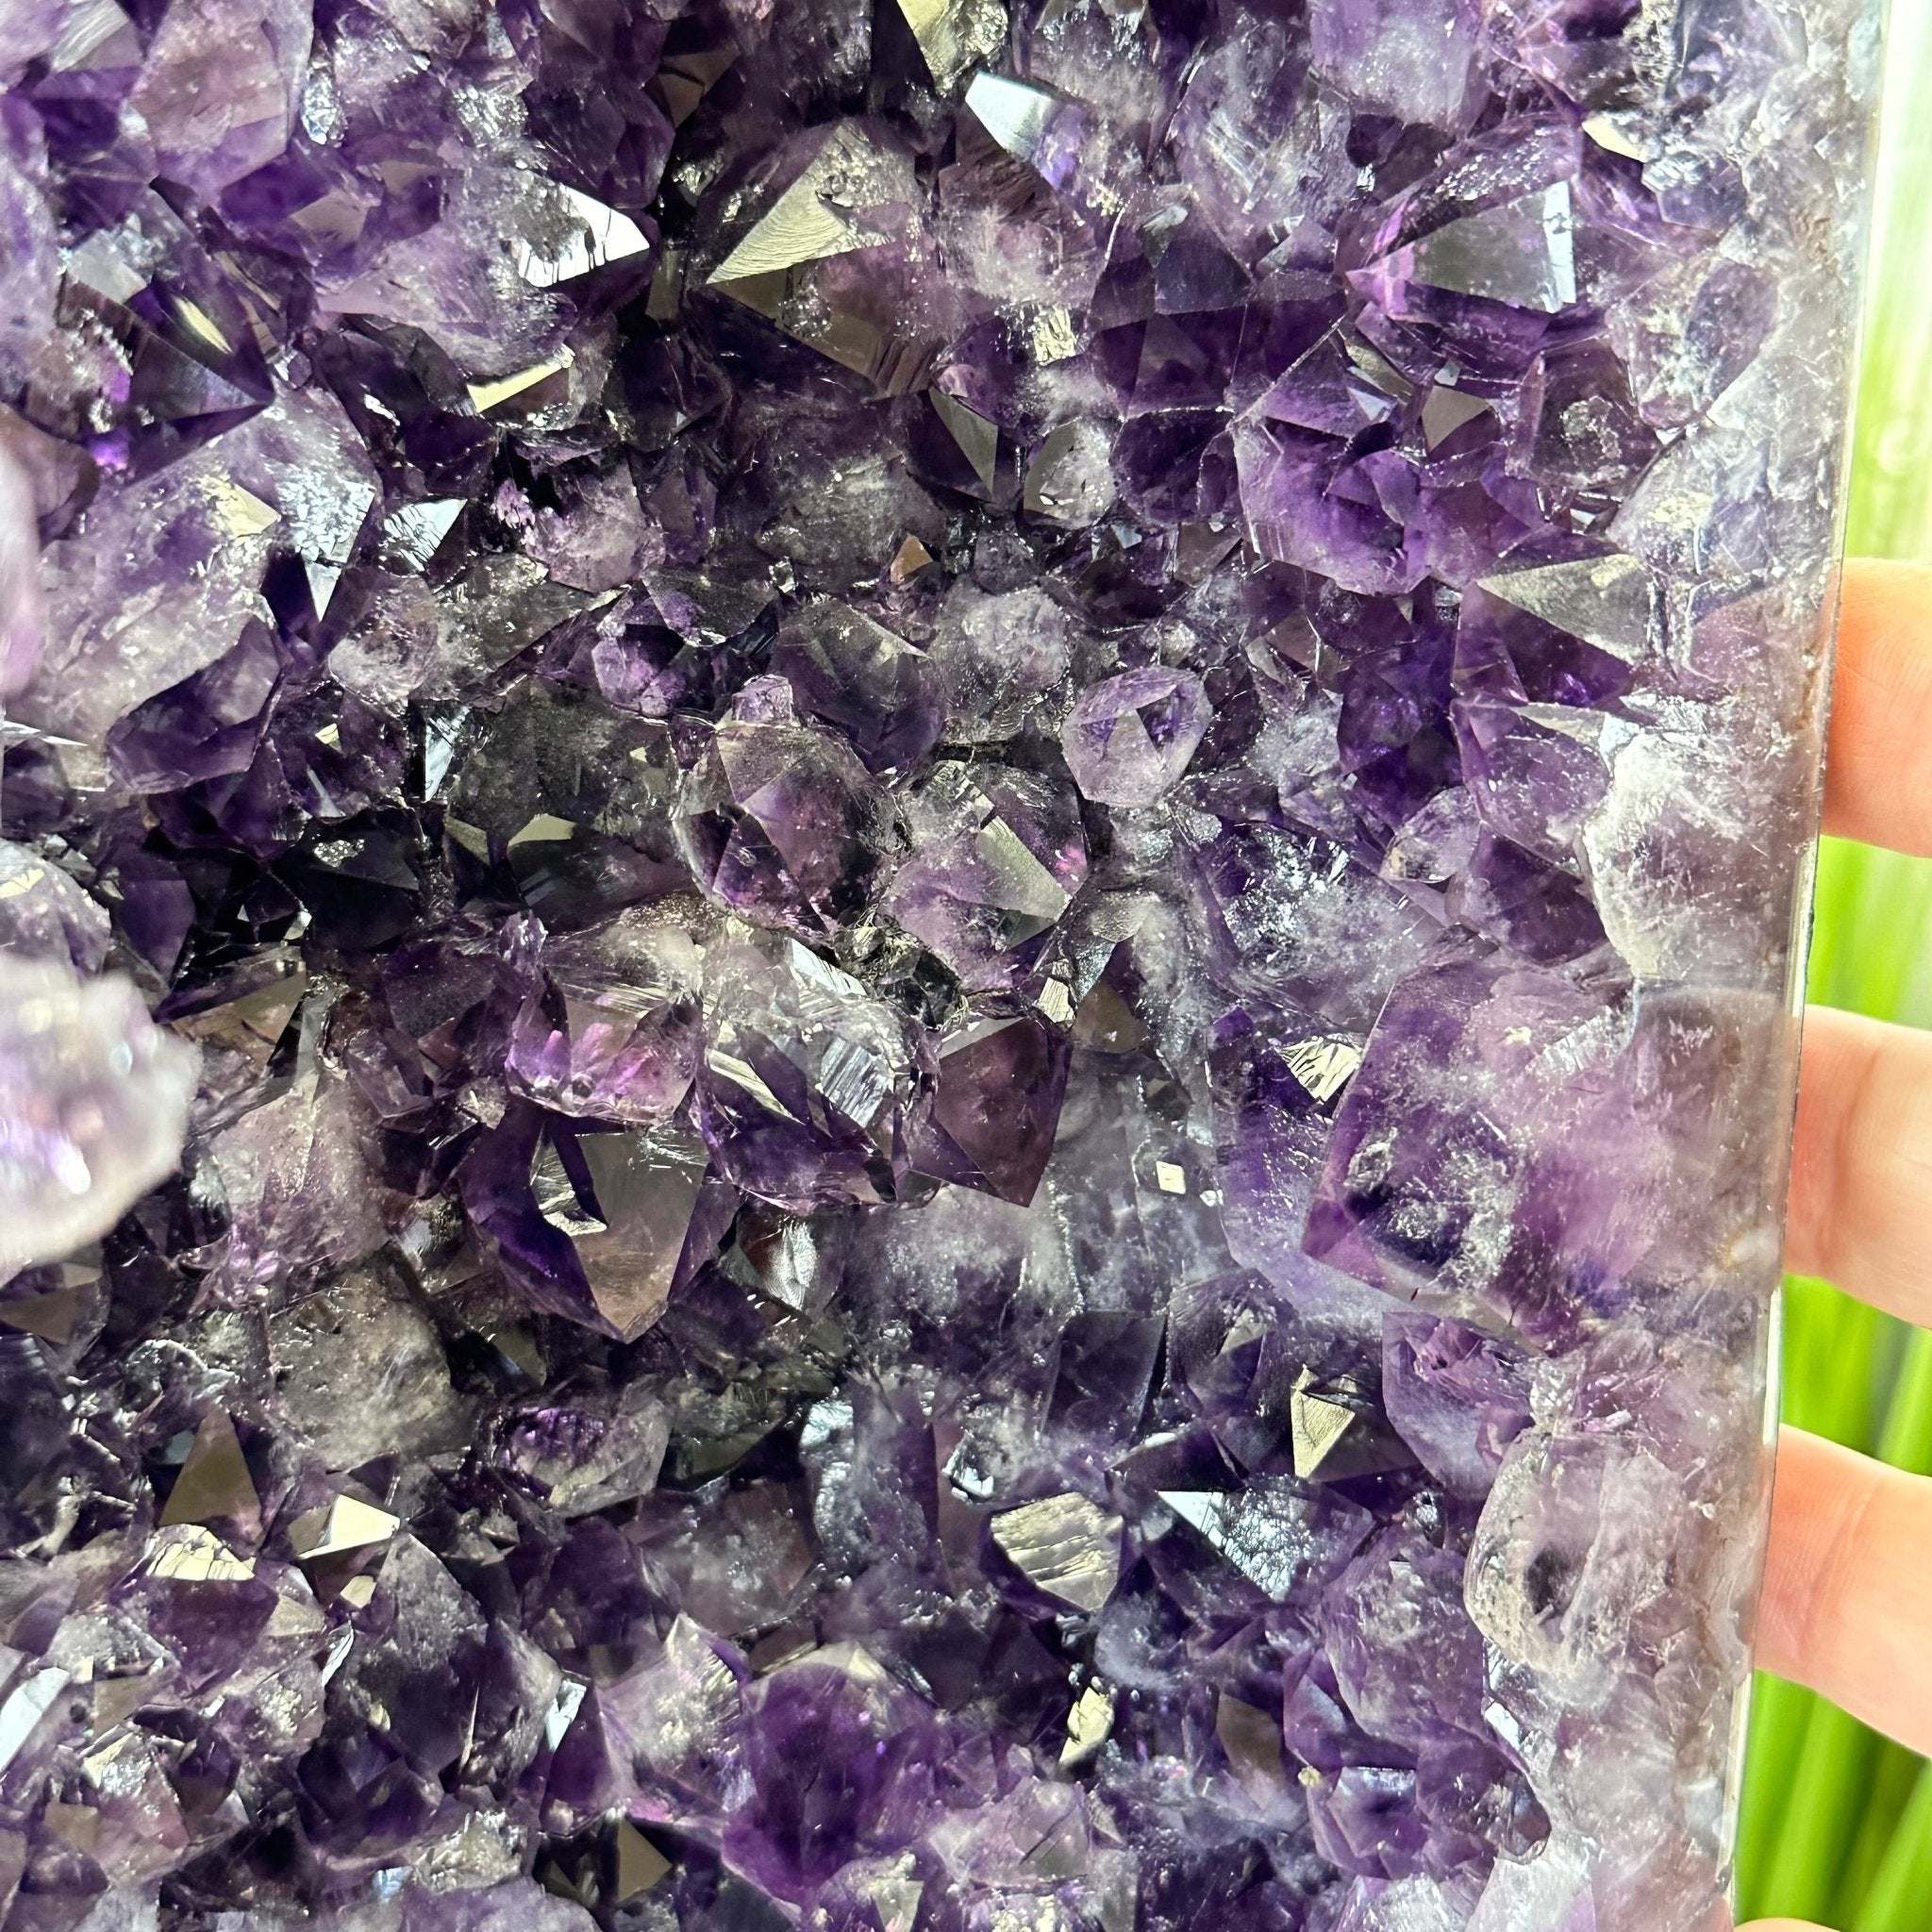 Large Extra Plus Quality Brazilian Amethyst Cathedral, 121 lbs & 69" Tall #5601-1332 - Brazil GemsBrazil GemsLarge Extra Plus Quality Brazilian Amethyst Cathedral, 121 lbs & 69" Tall #5601-1332Cathedrals5601-1332